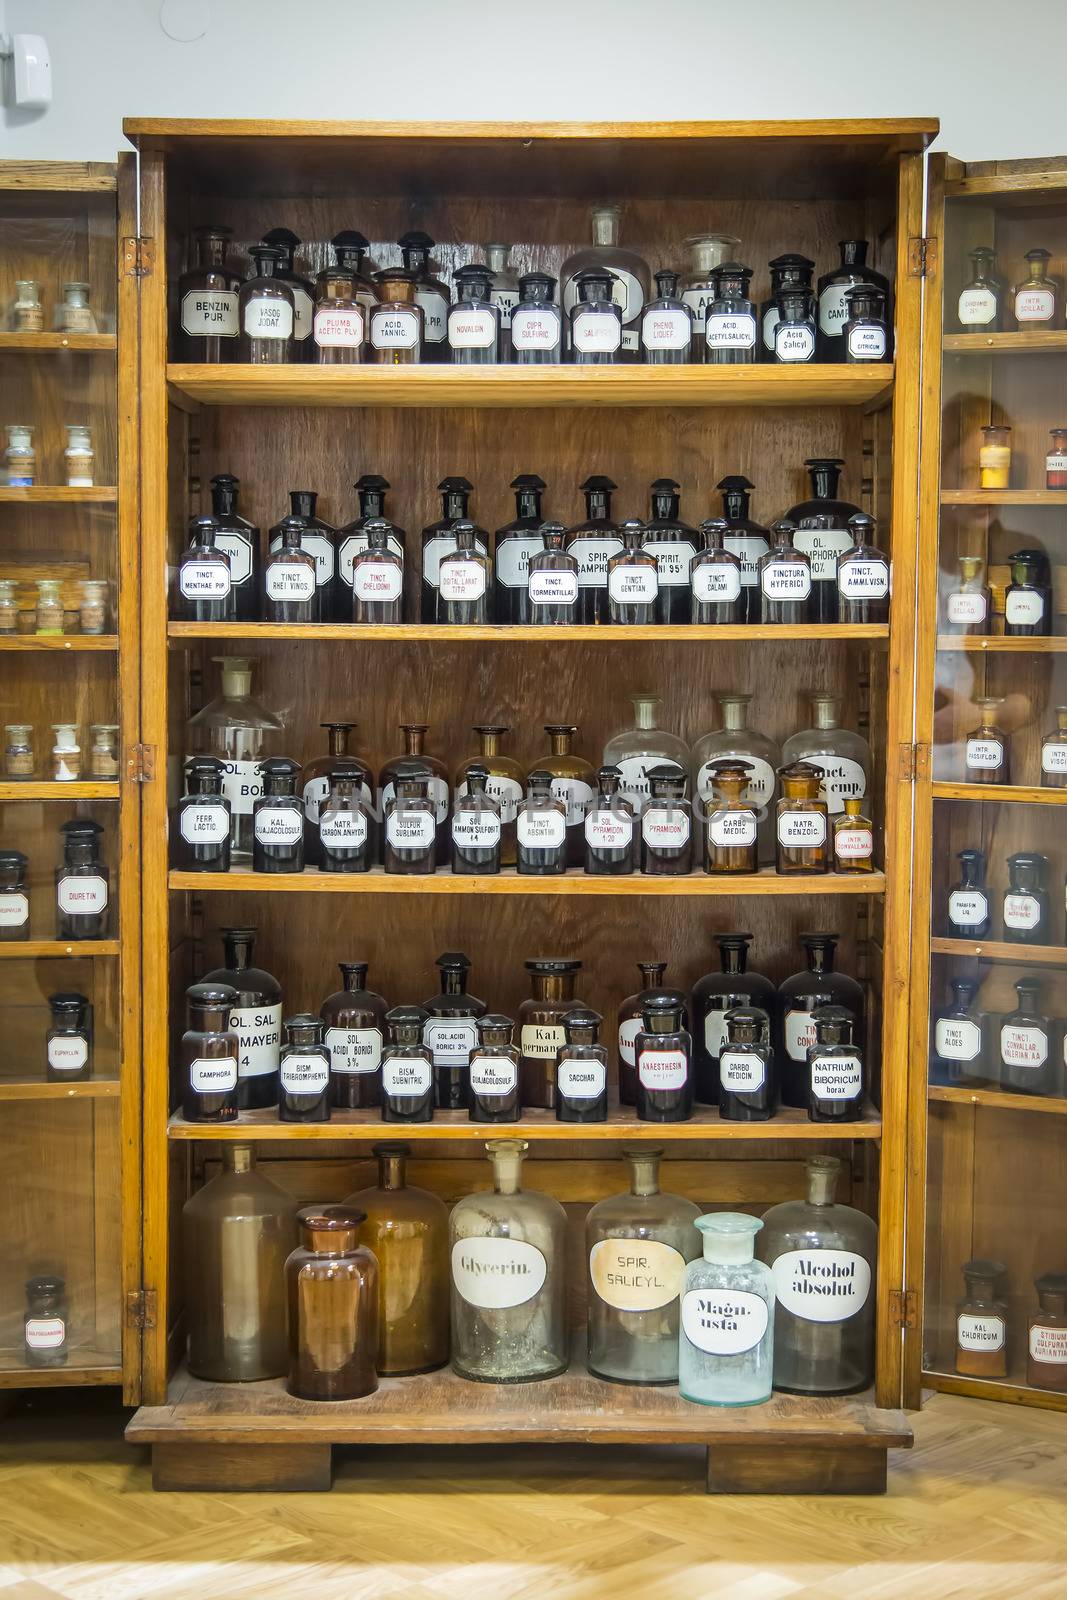 Old drug store, pharmacy museum in Wroclaw, Poland by furzyk73